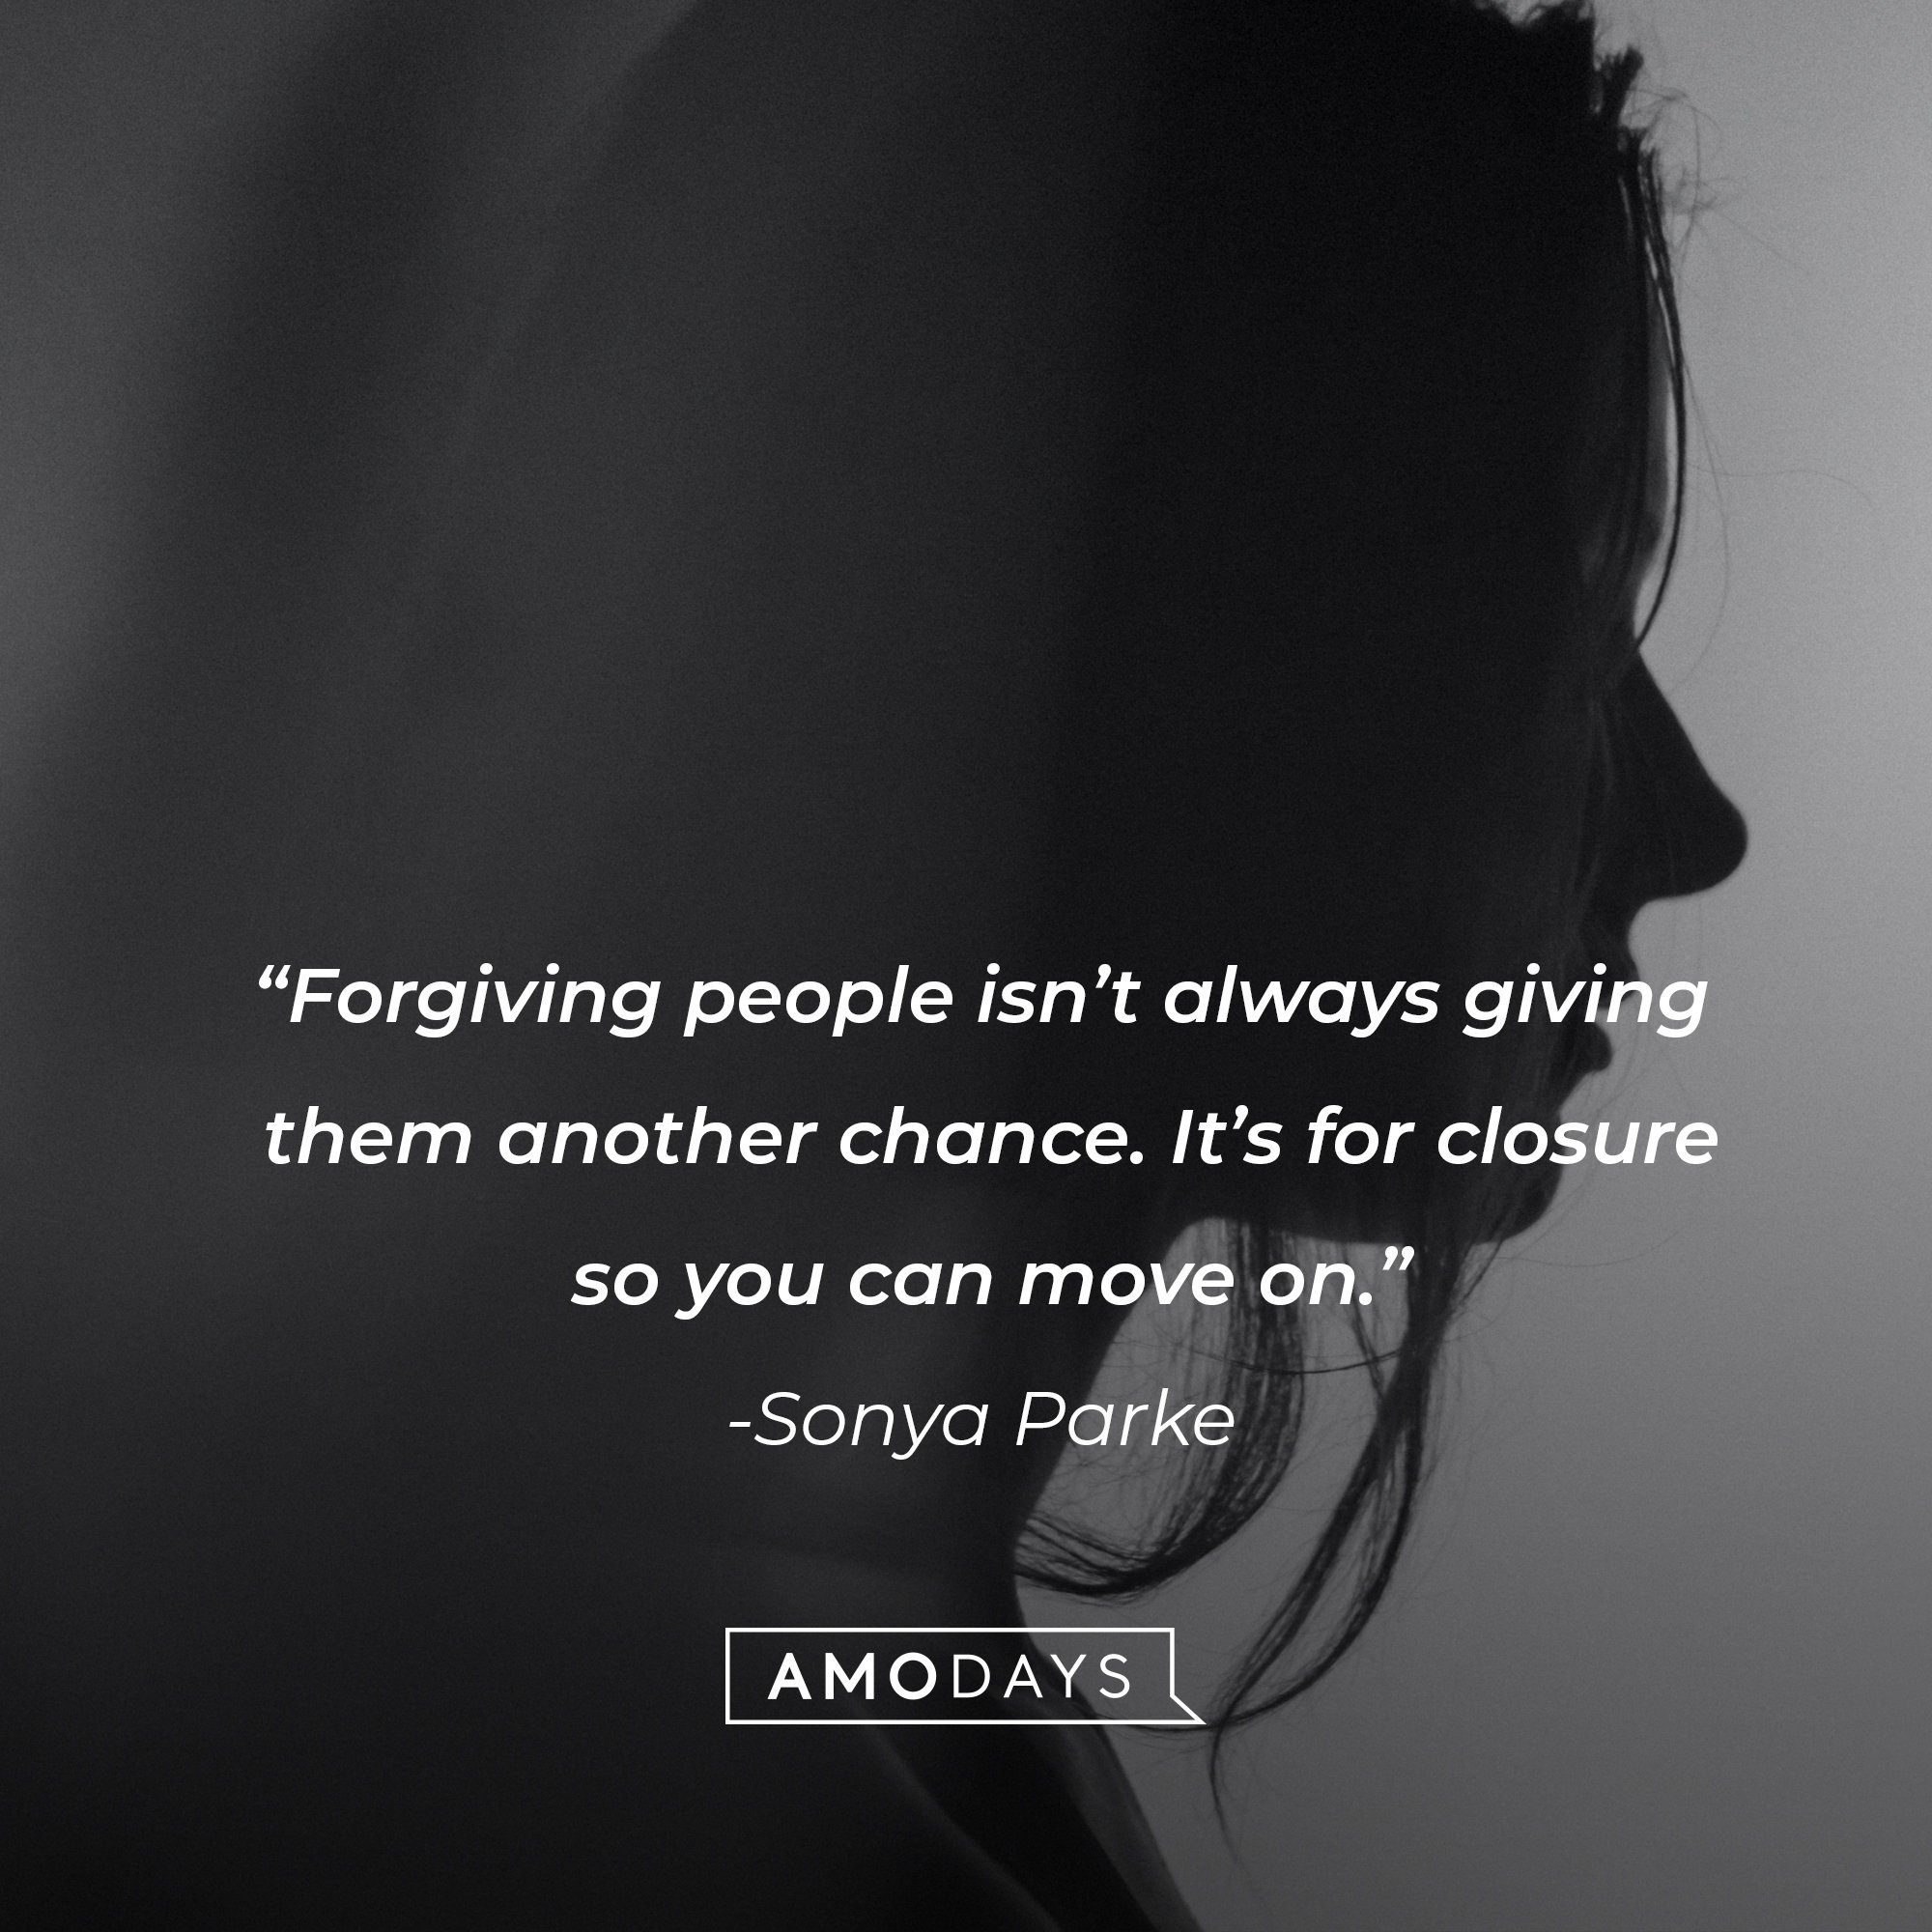 Sonya Parke's quote: "Forgiving people isn't always giving them another chance. It's for closure so you can move on." | Image: AmoDays